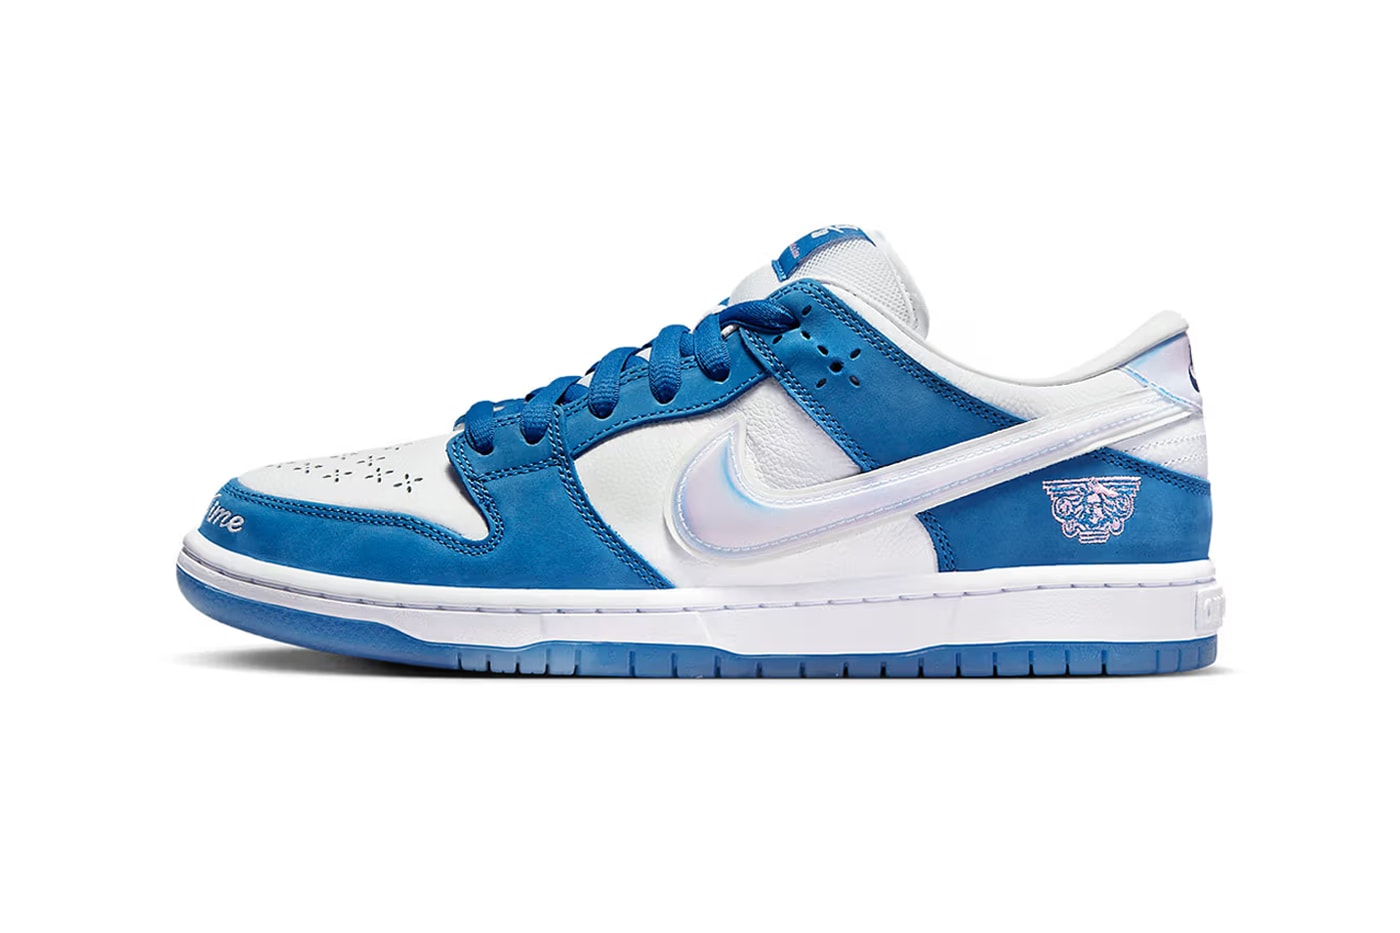 born x raised nike sb dunk low release date info store list buying guide photos price 